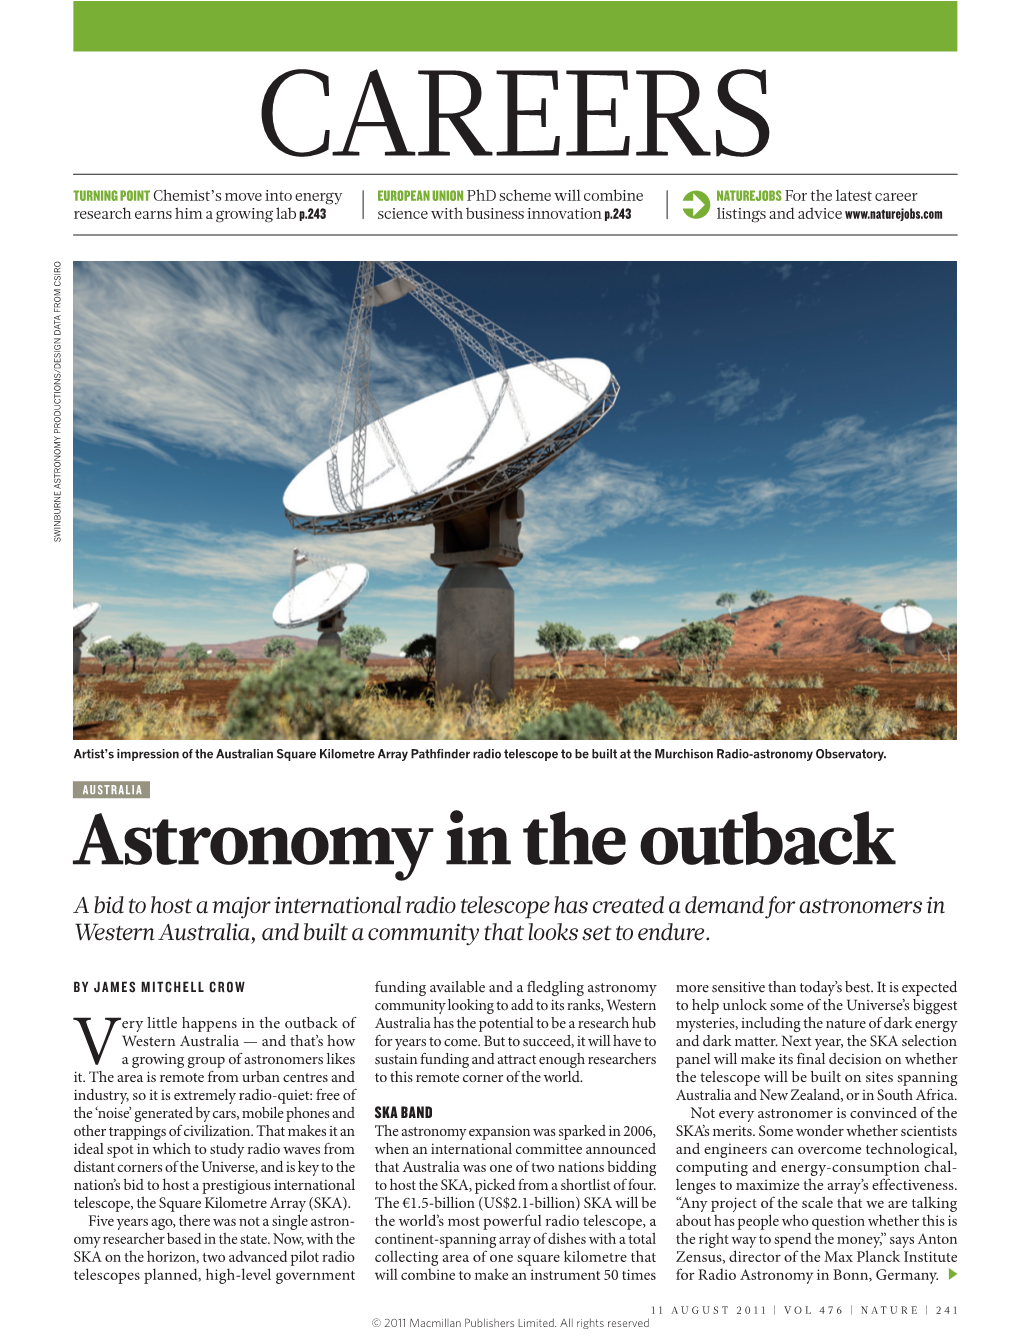 Astronomy in the Outback